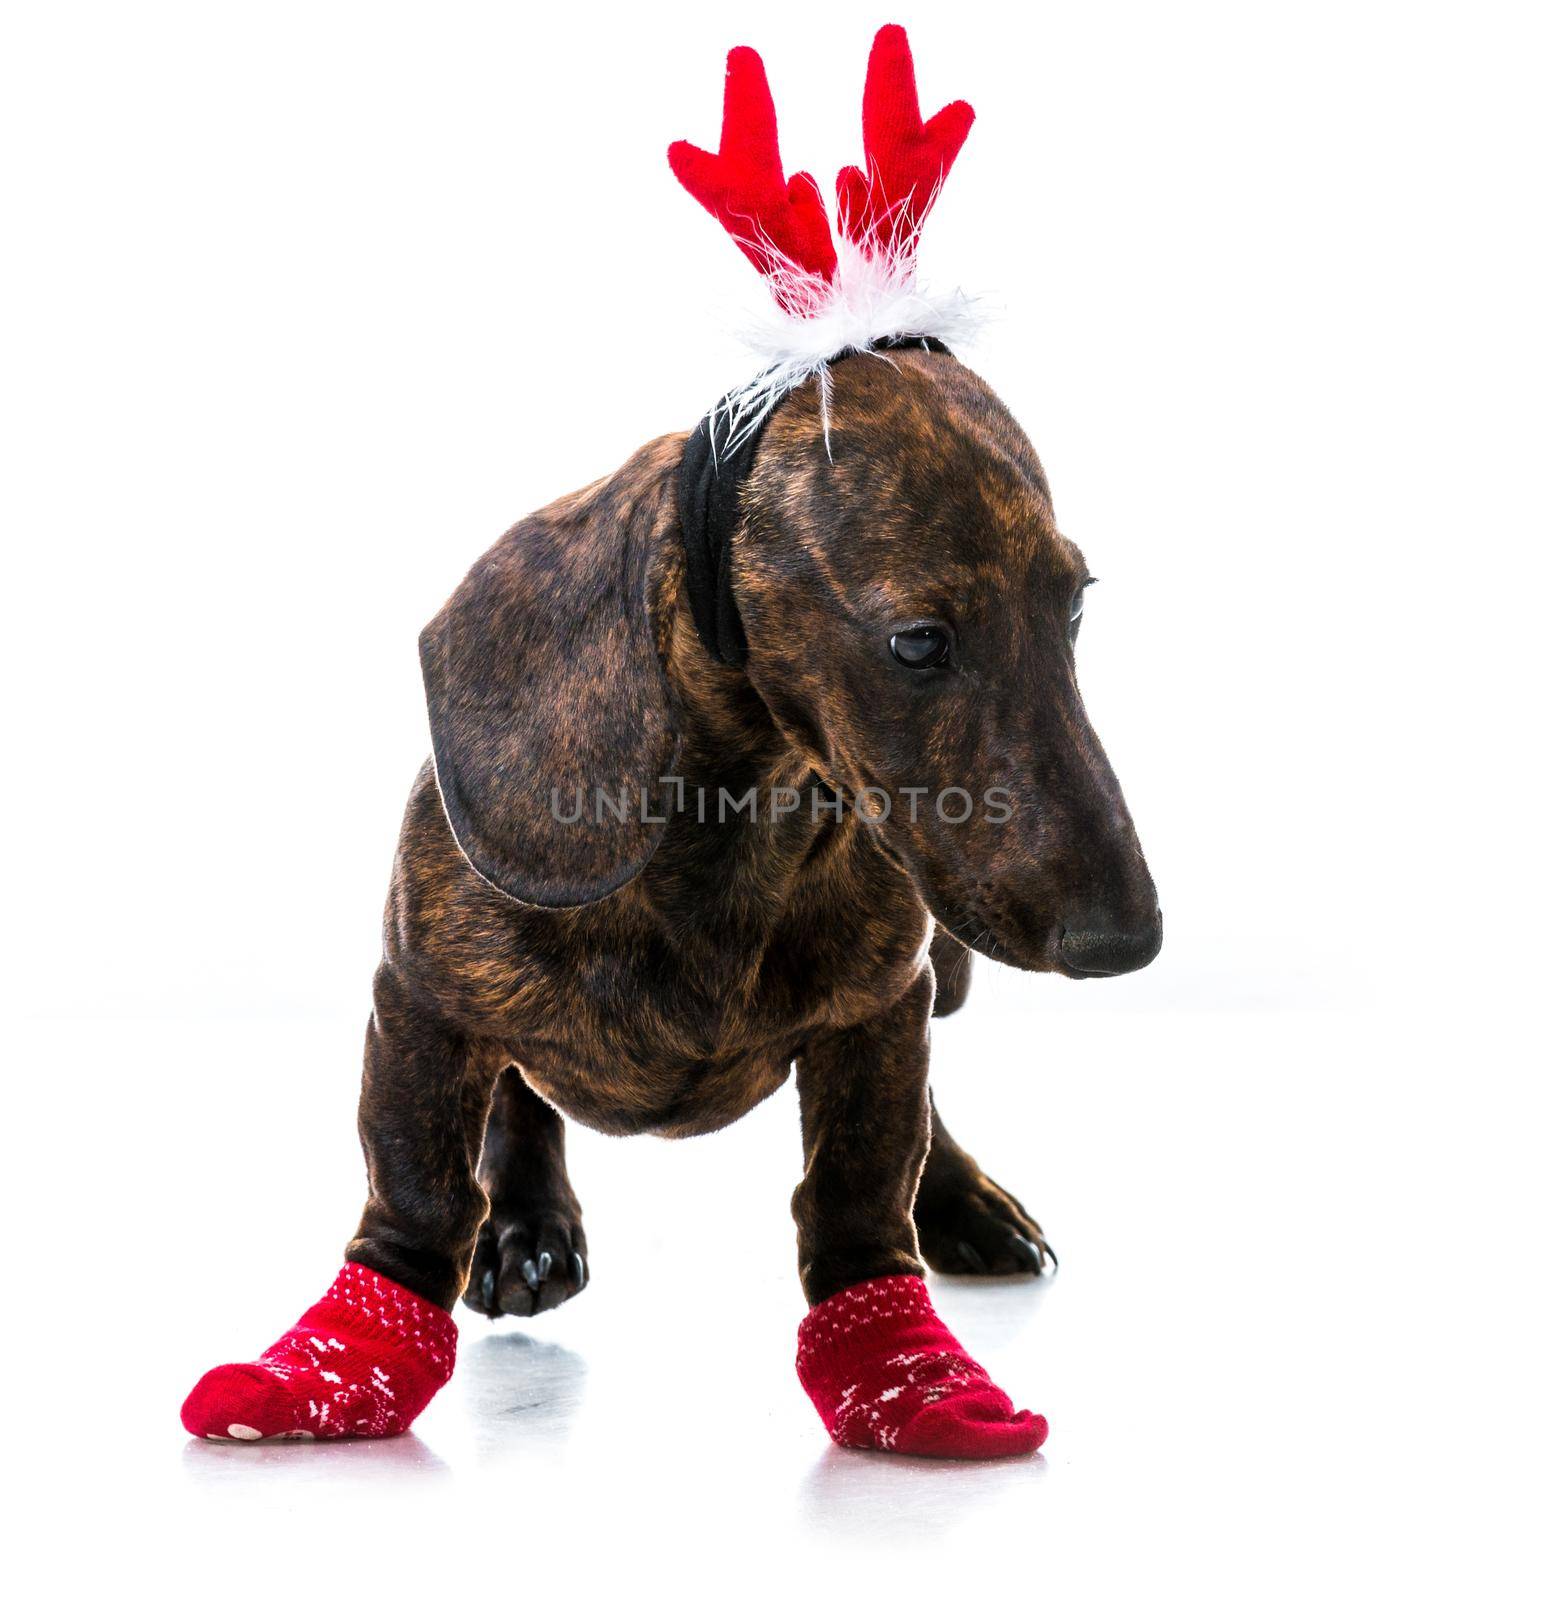 Dachshund in Santa costume on a white background isolated